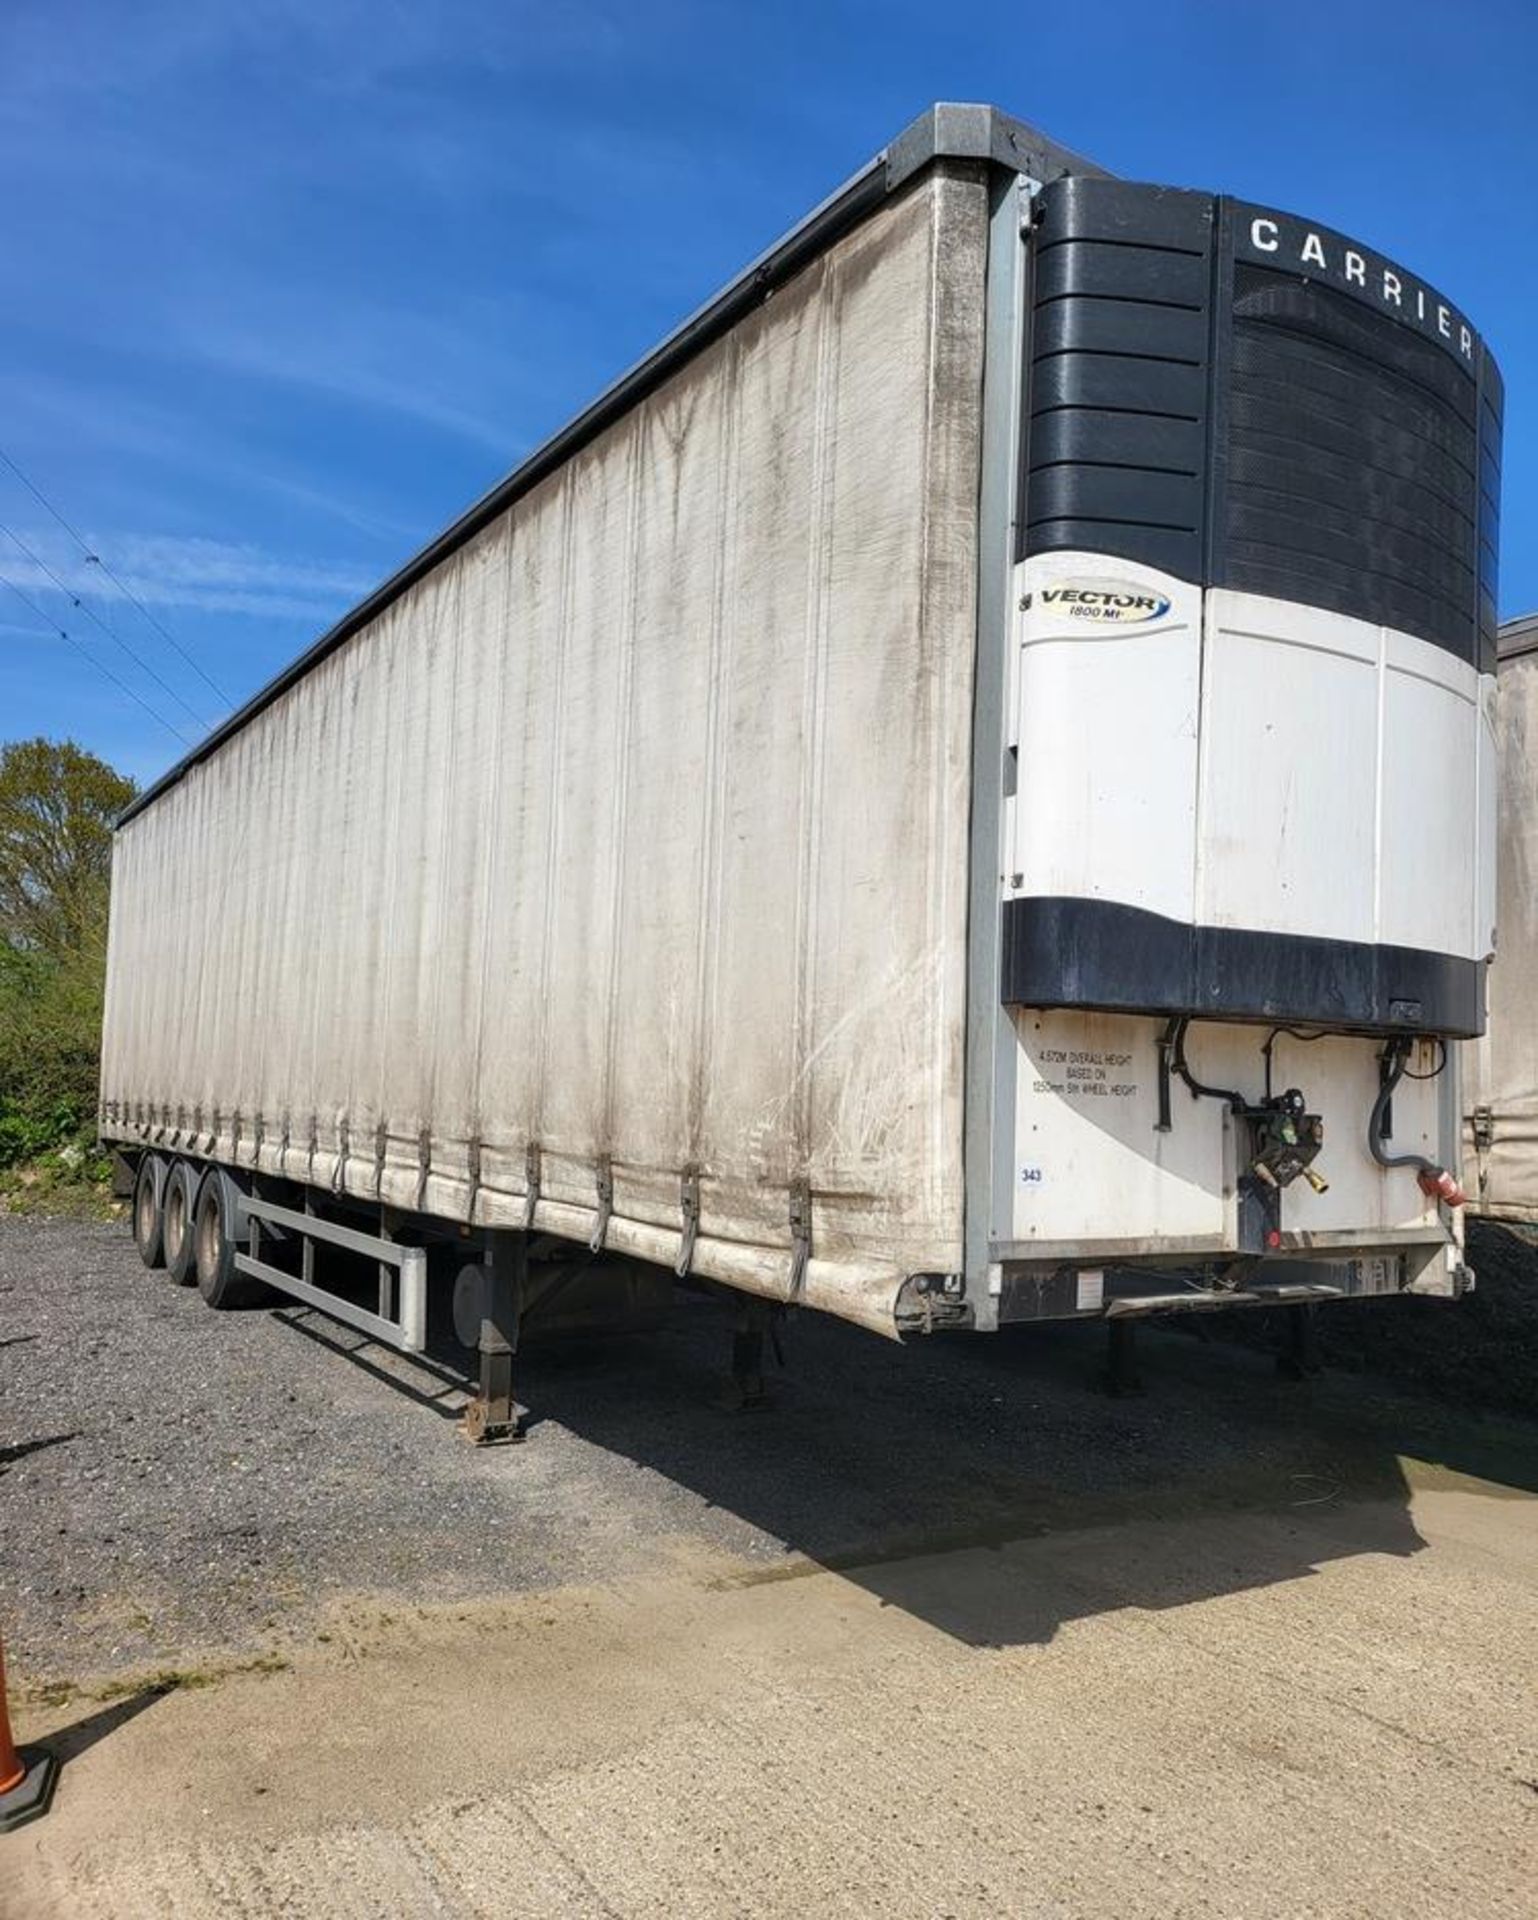 2011 Lawrence David tri axle 40' Tentliner trailer c/w Carrier Vector chiller, two deck frame. 39T